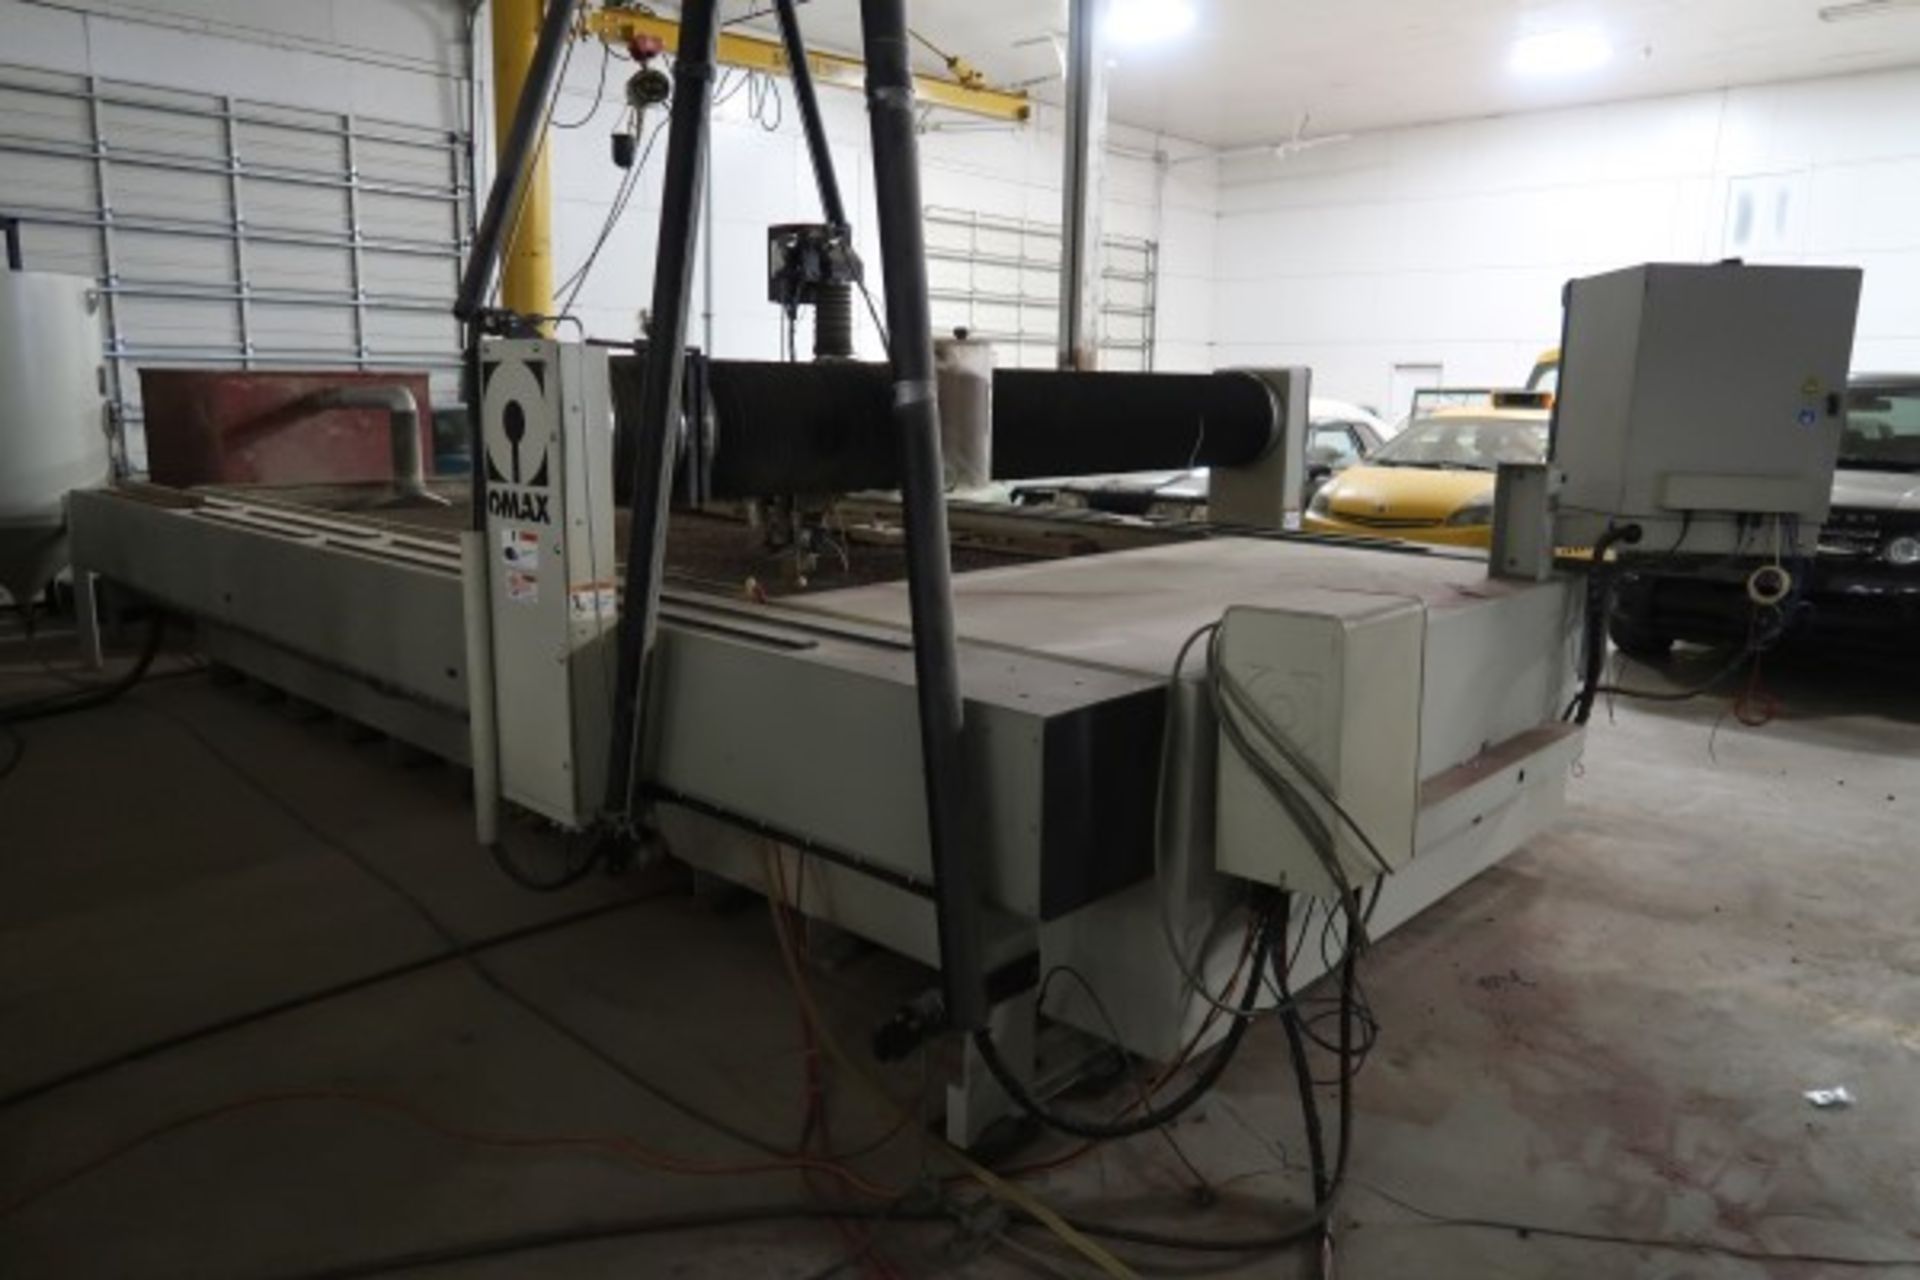 2008 OMAX WATER JET CUTTING TABLE, MODEL 80160, S/N E511753, 80” X 160” CUTTING SURFACE, - Image 2 of 22